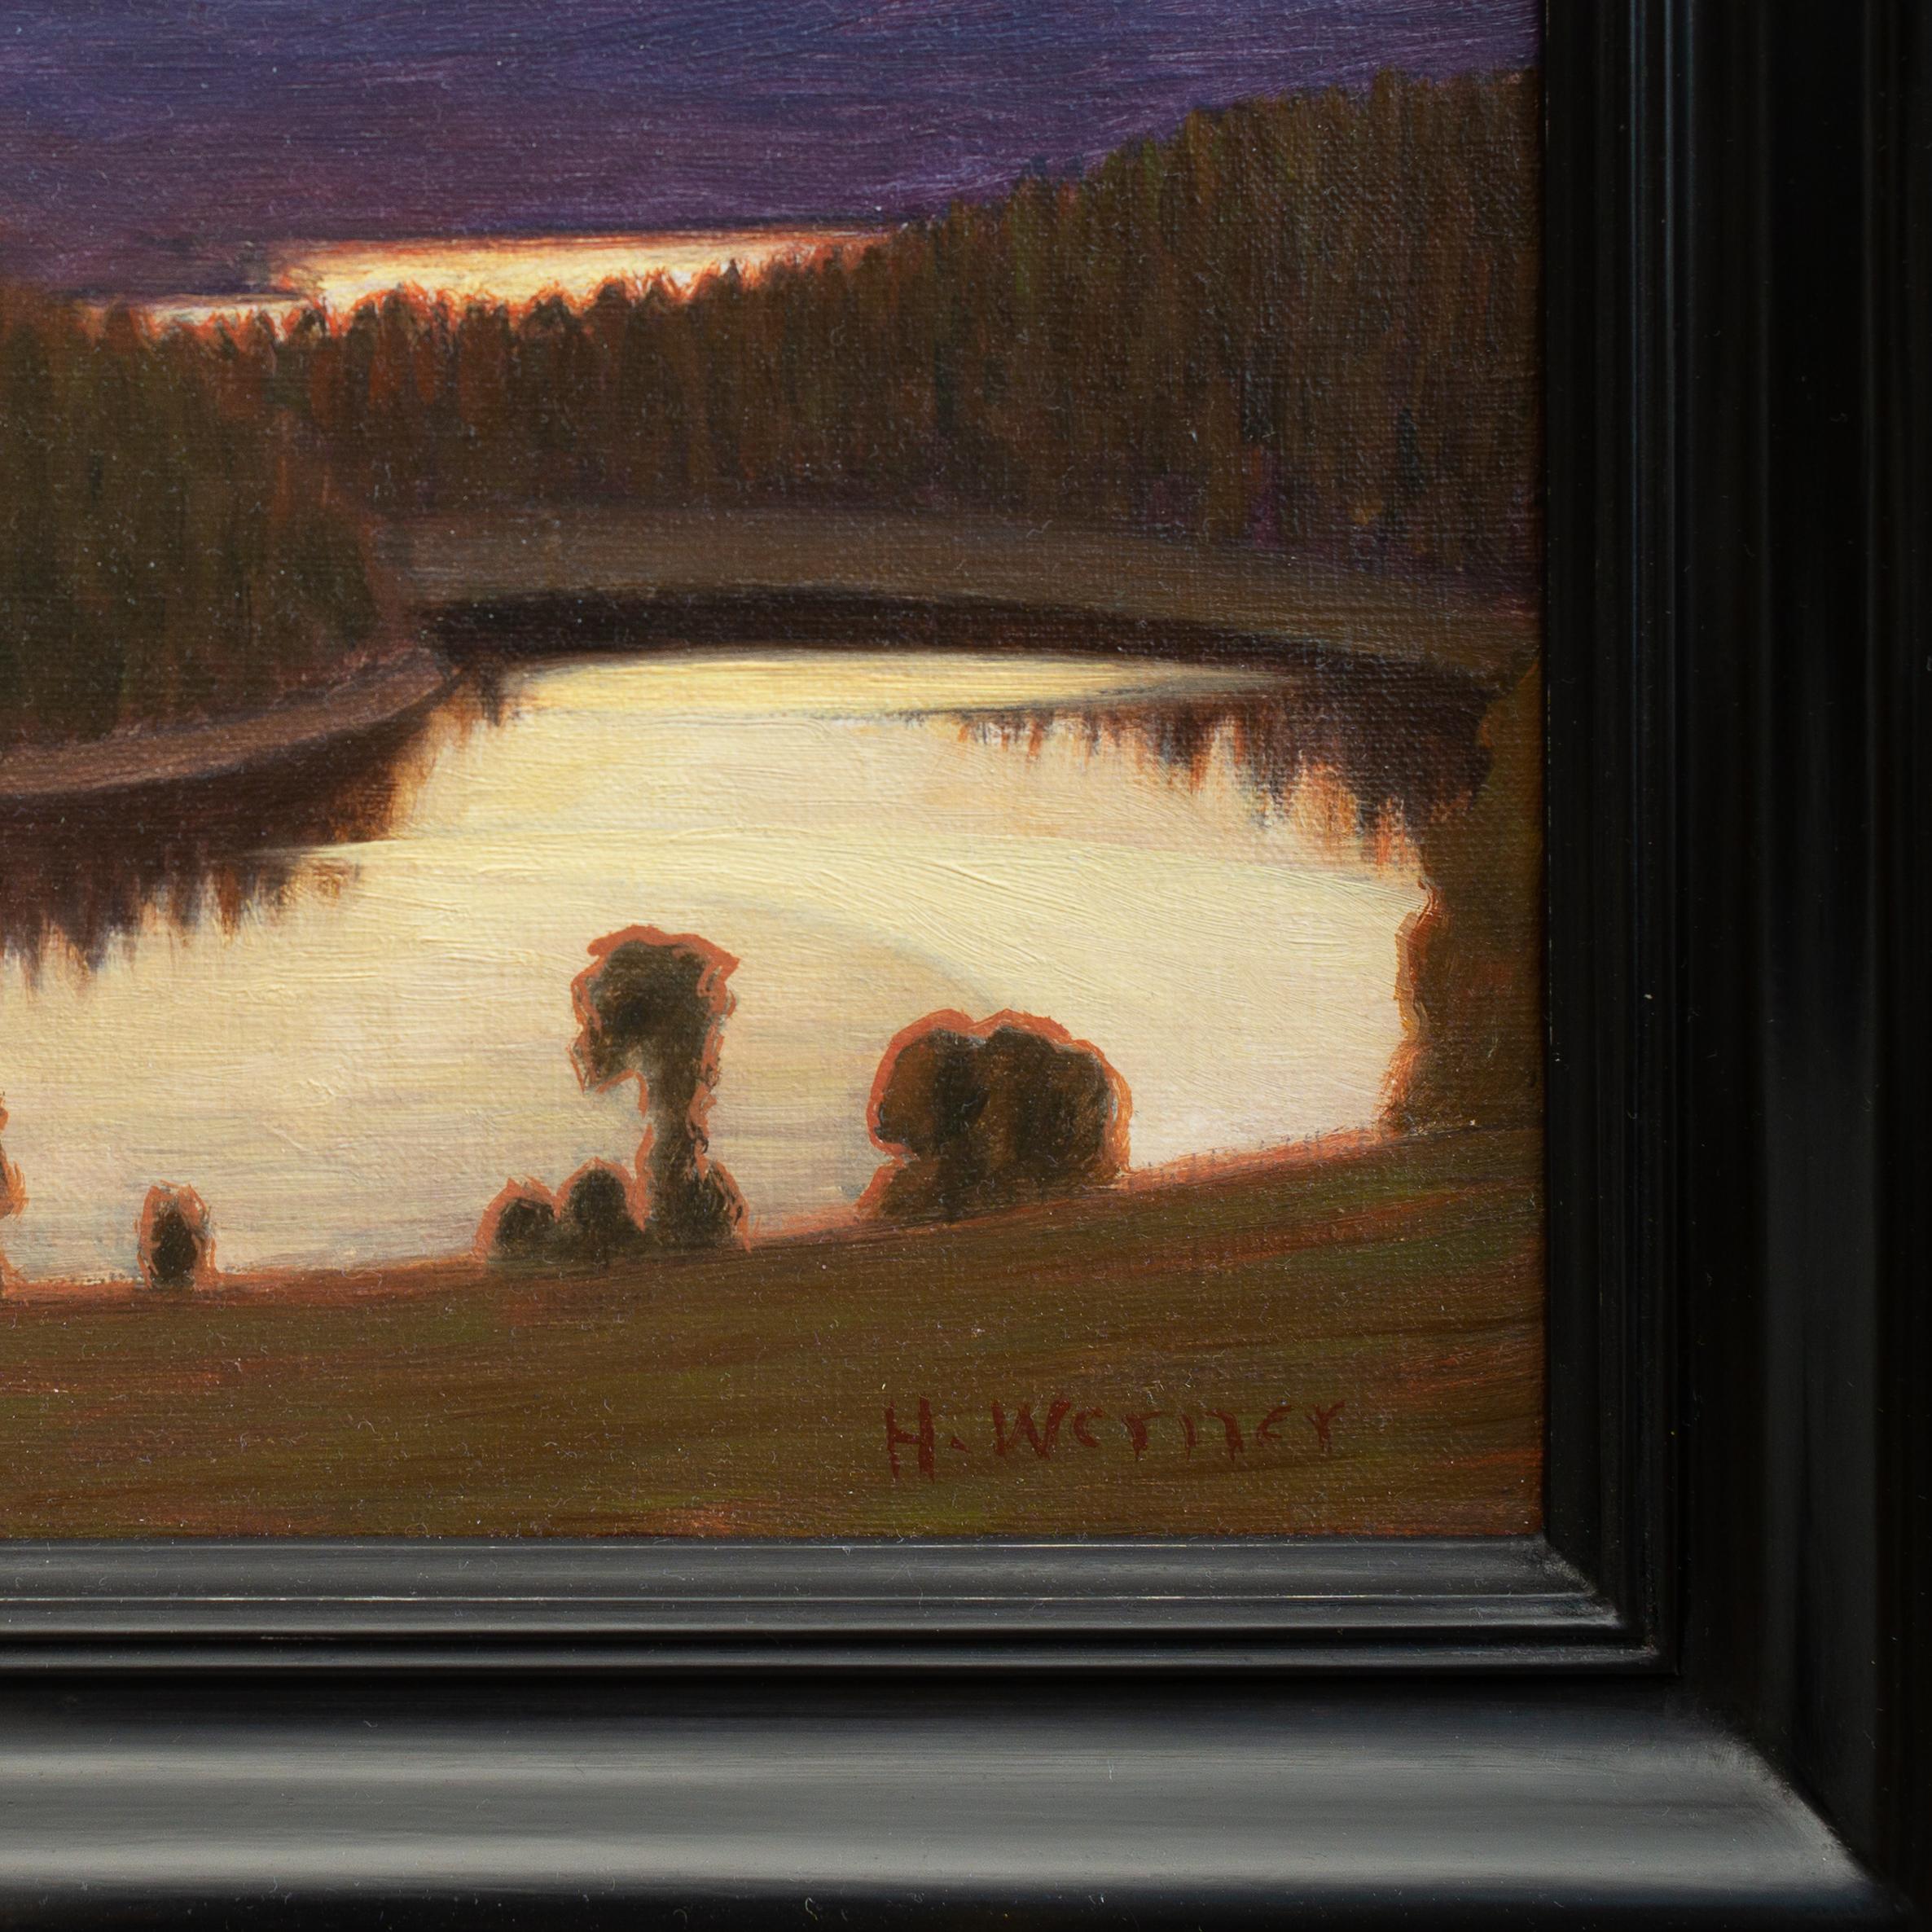 Landscape View from Värmland (Glafsfjorden?) by Hilding Werner, Oil Painting 1